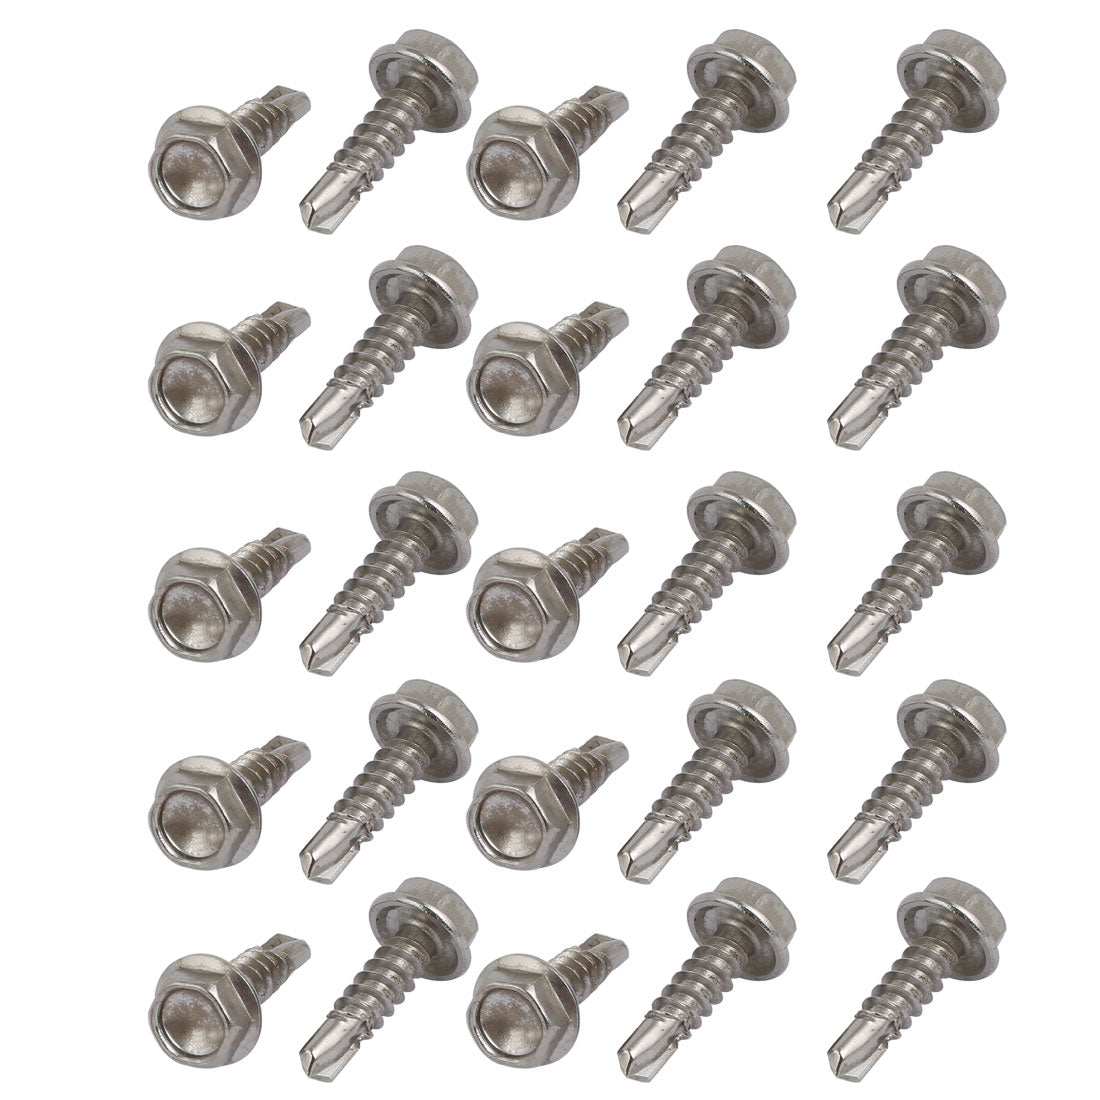 uxcell Uxcell M4.2x16mm 410 Stainless Steel Self Tapping Drilling Hex Flange Bolt 25pcs